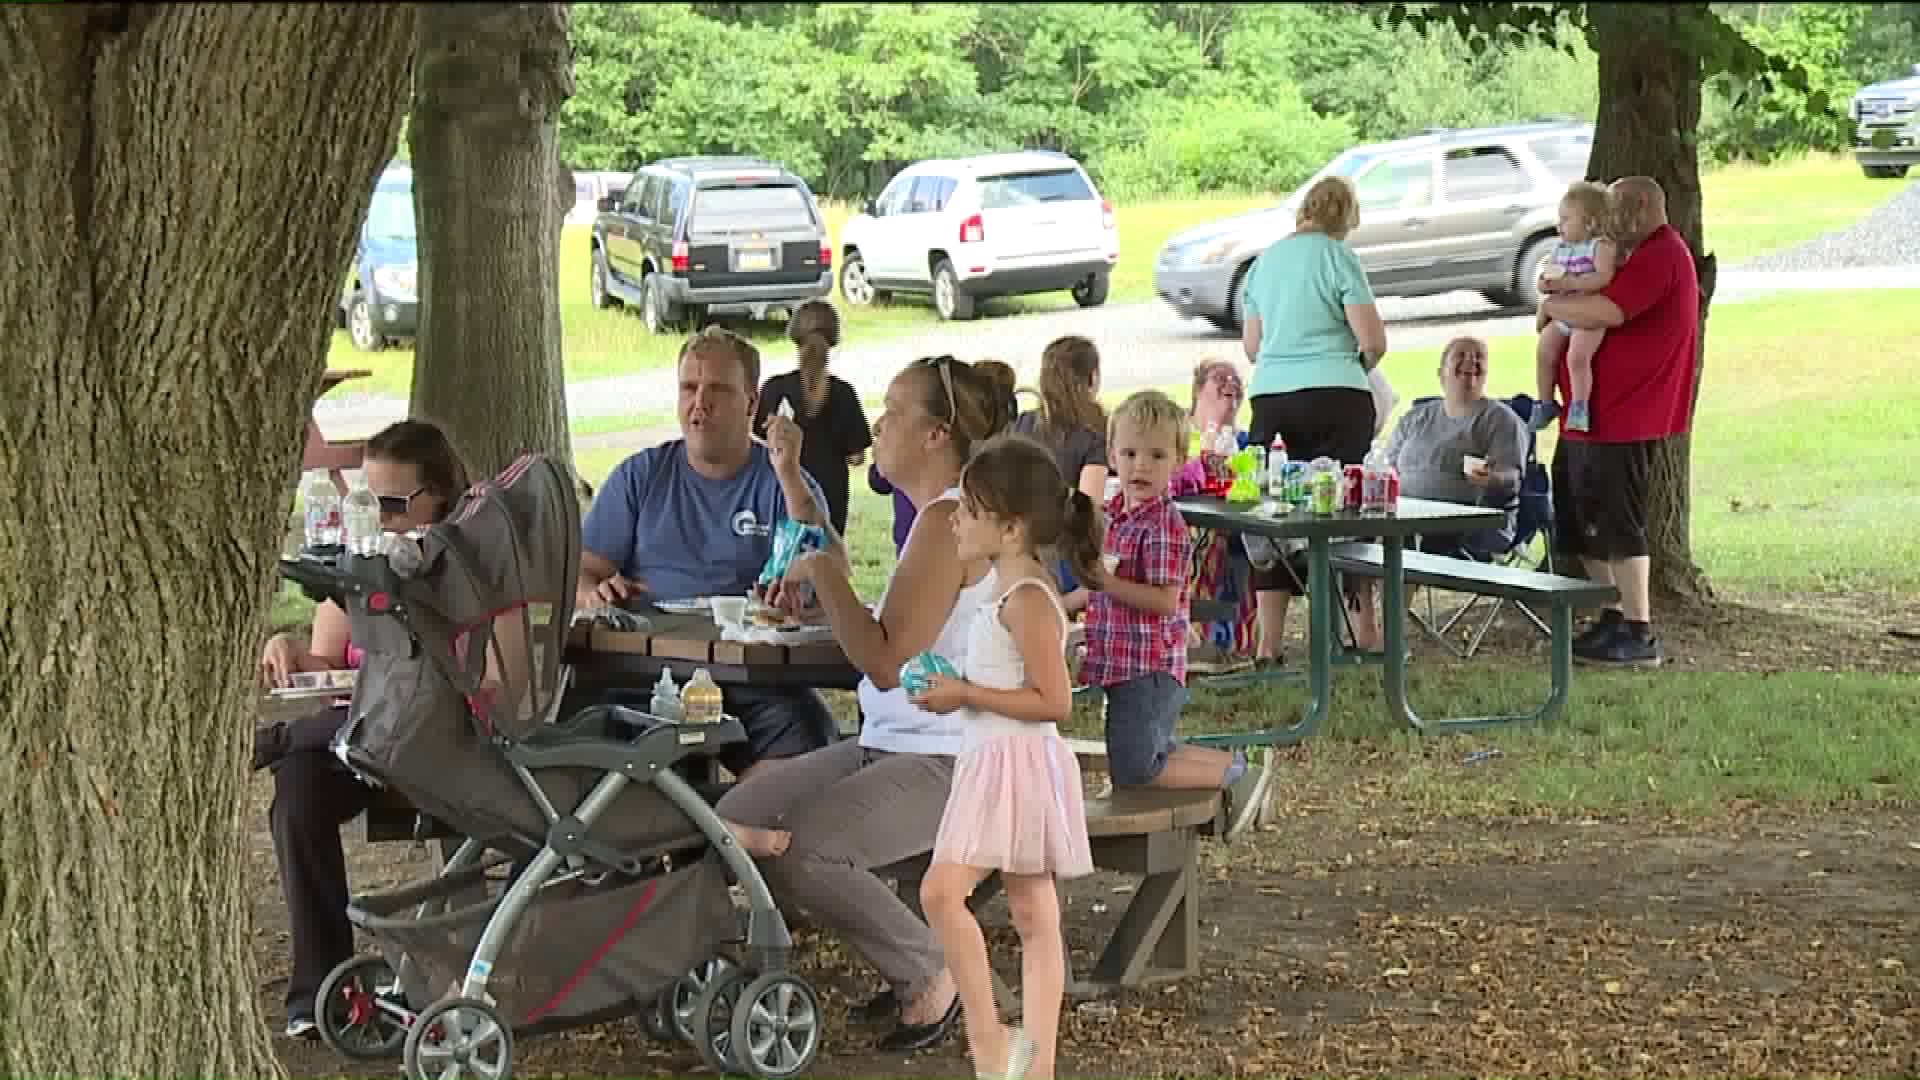 Family Fun at Fire Company Picnic in Luzerne County